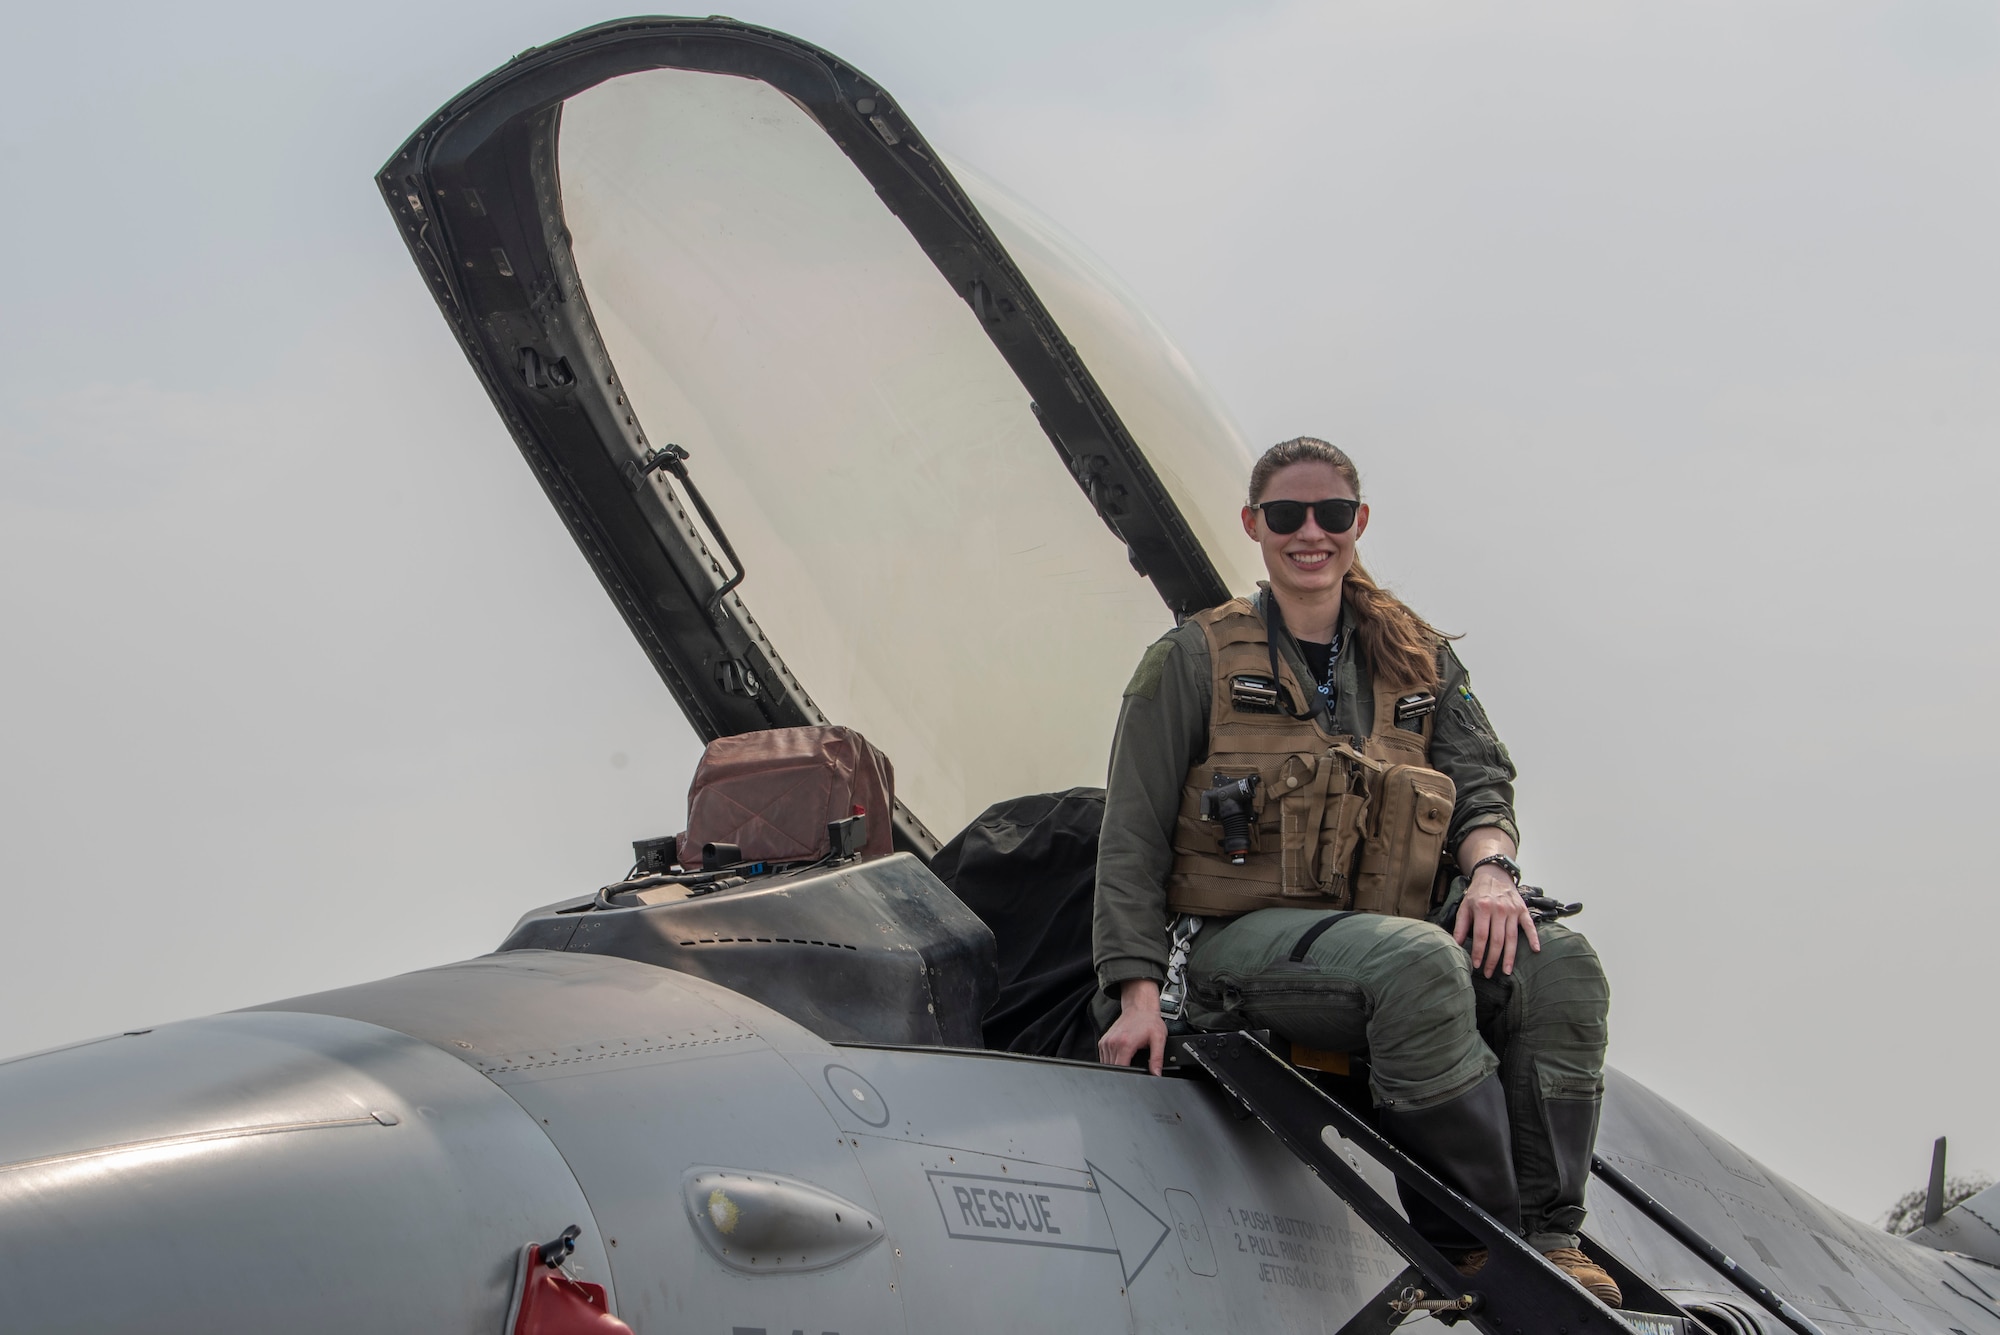 First Lt. Samantha “Force” Colombo, 35th Fighter Squadron pilot, returns from flying an F-16 Fighting Falcon during Cope Tiger 2022 at Korat Royal Thai Air Base, Thailand, March 18, 2022. She will soon have a jet dedicated to her at Kunsan Air Base, Republic of Korea. (U.S. Air Force photo by Staff Sgt. Jesenia Landaverde)